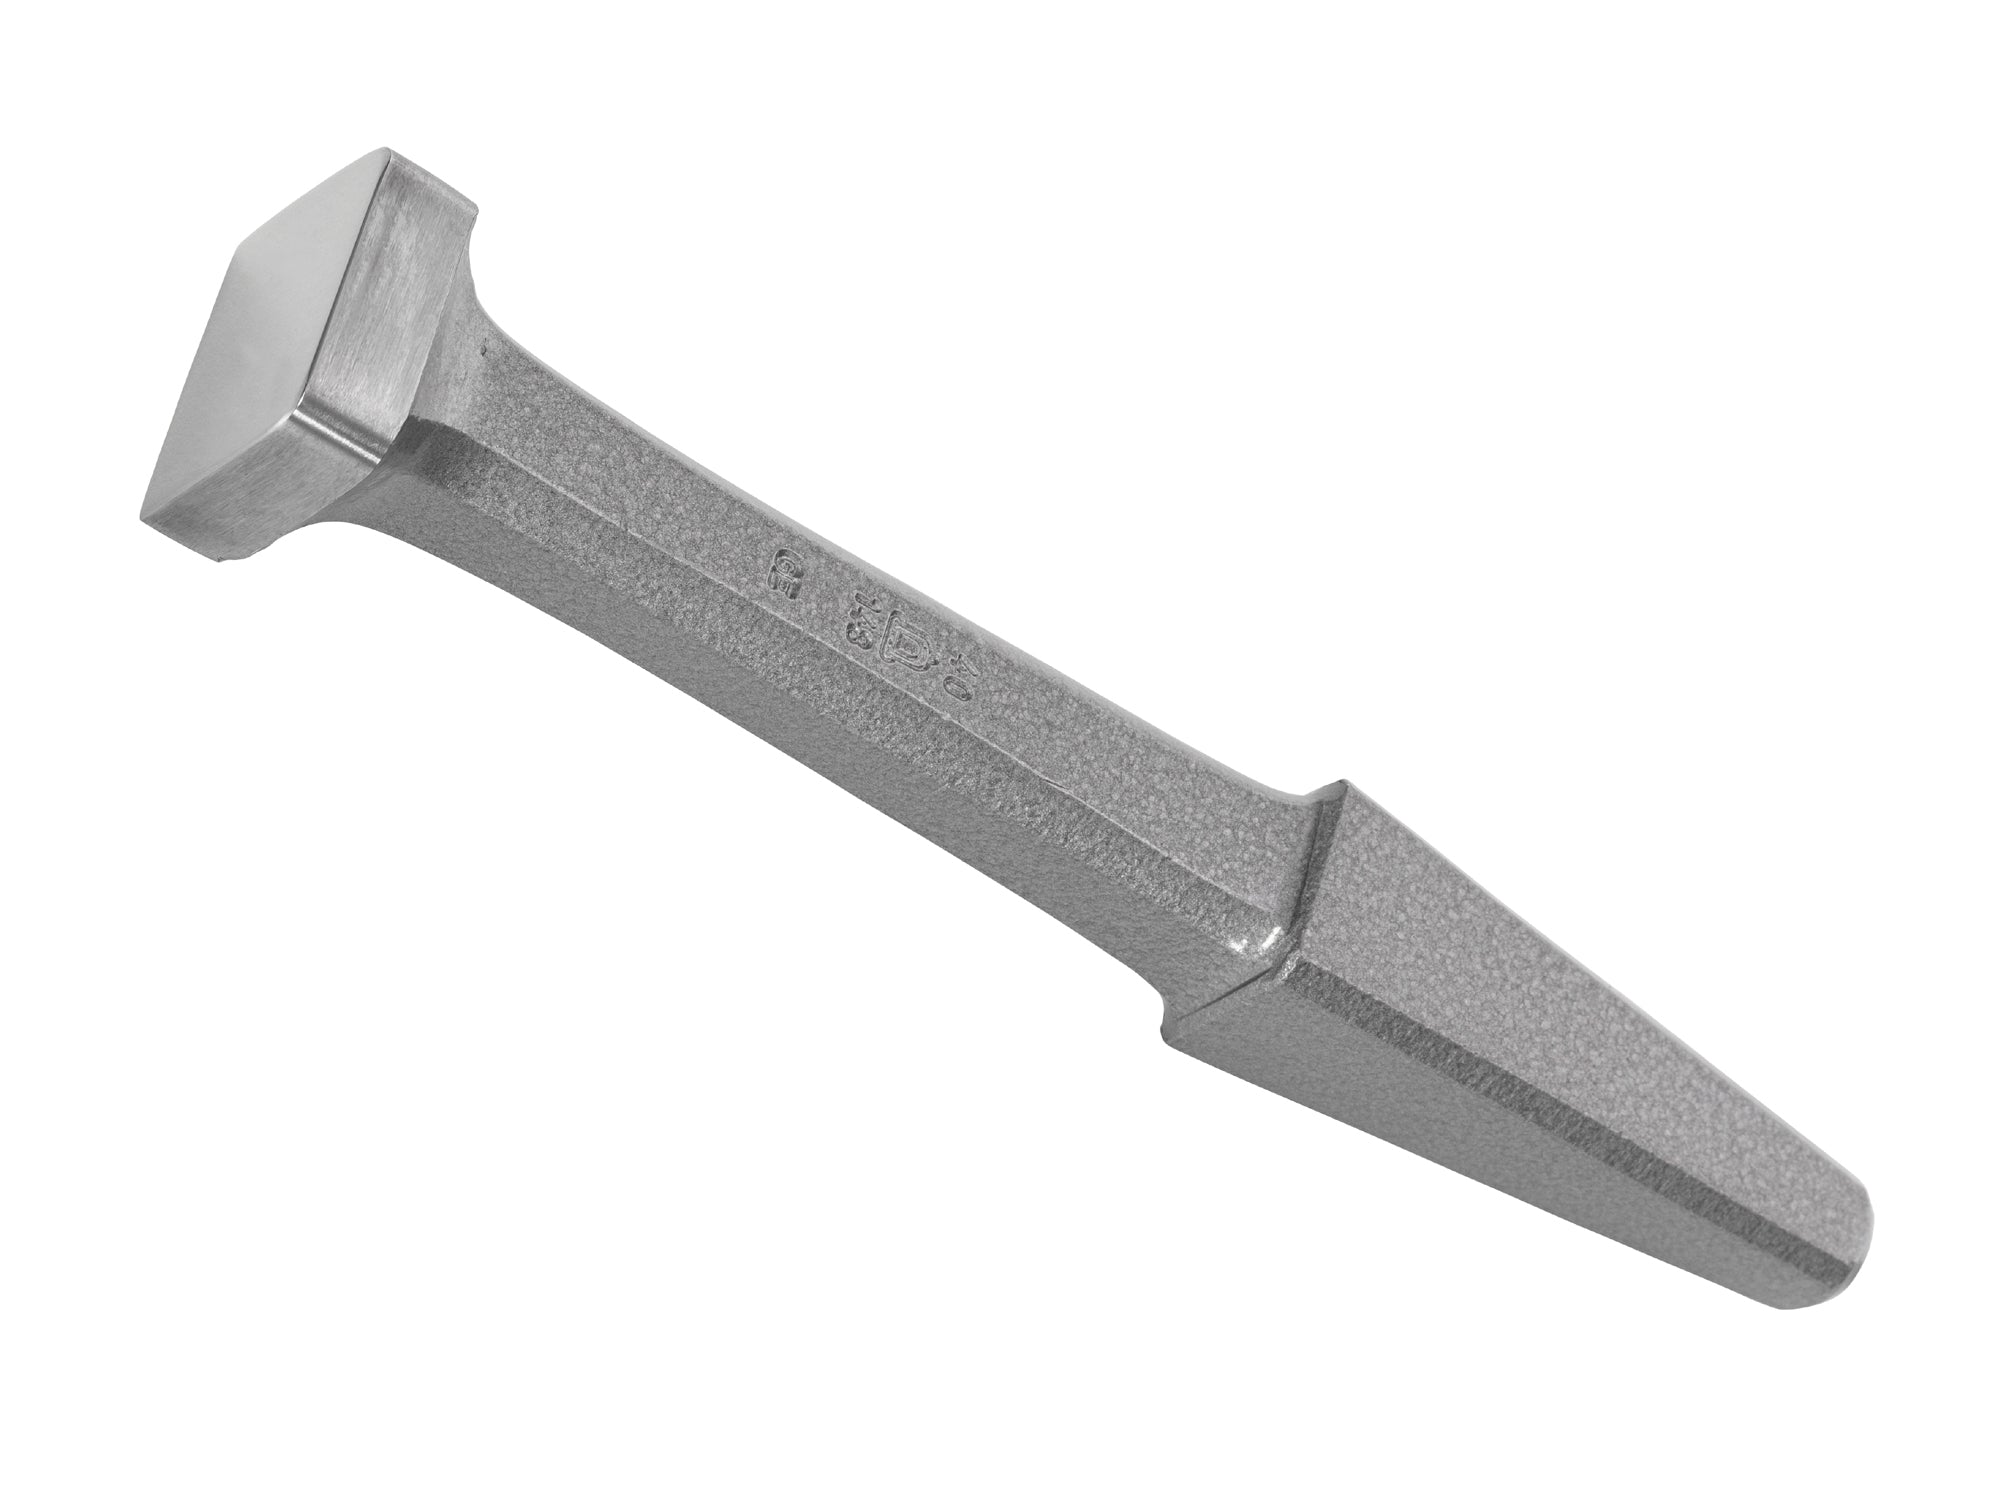 Tinsmith 0014800 Square Face w/ Two Round Corners Socket Stake - Blacksmith Source Tool Company 